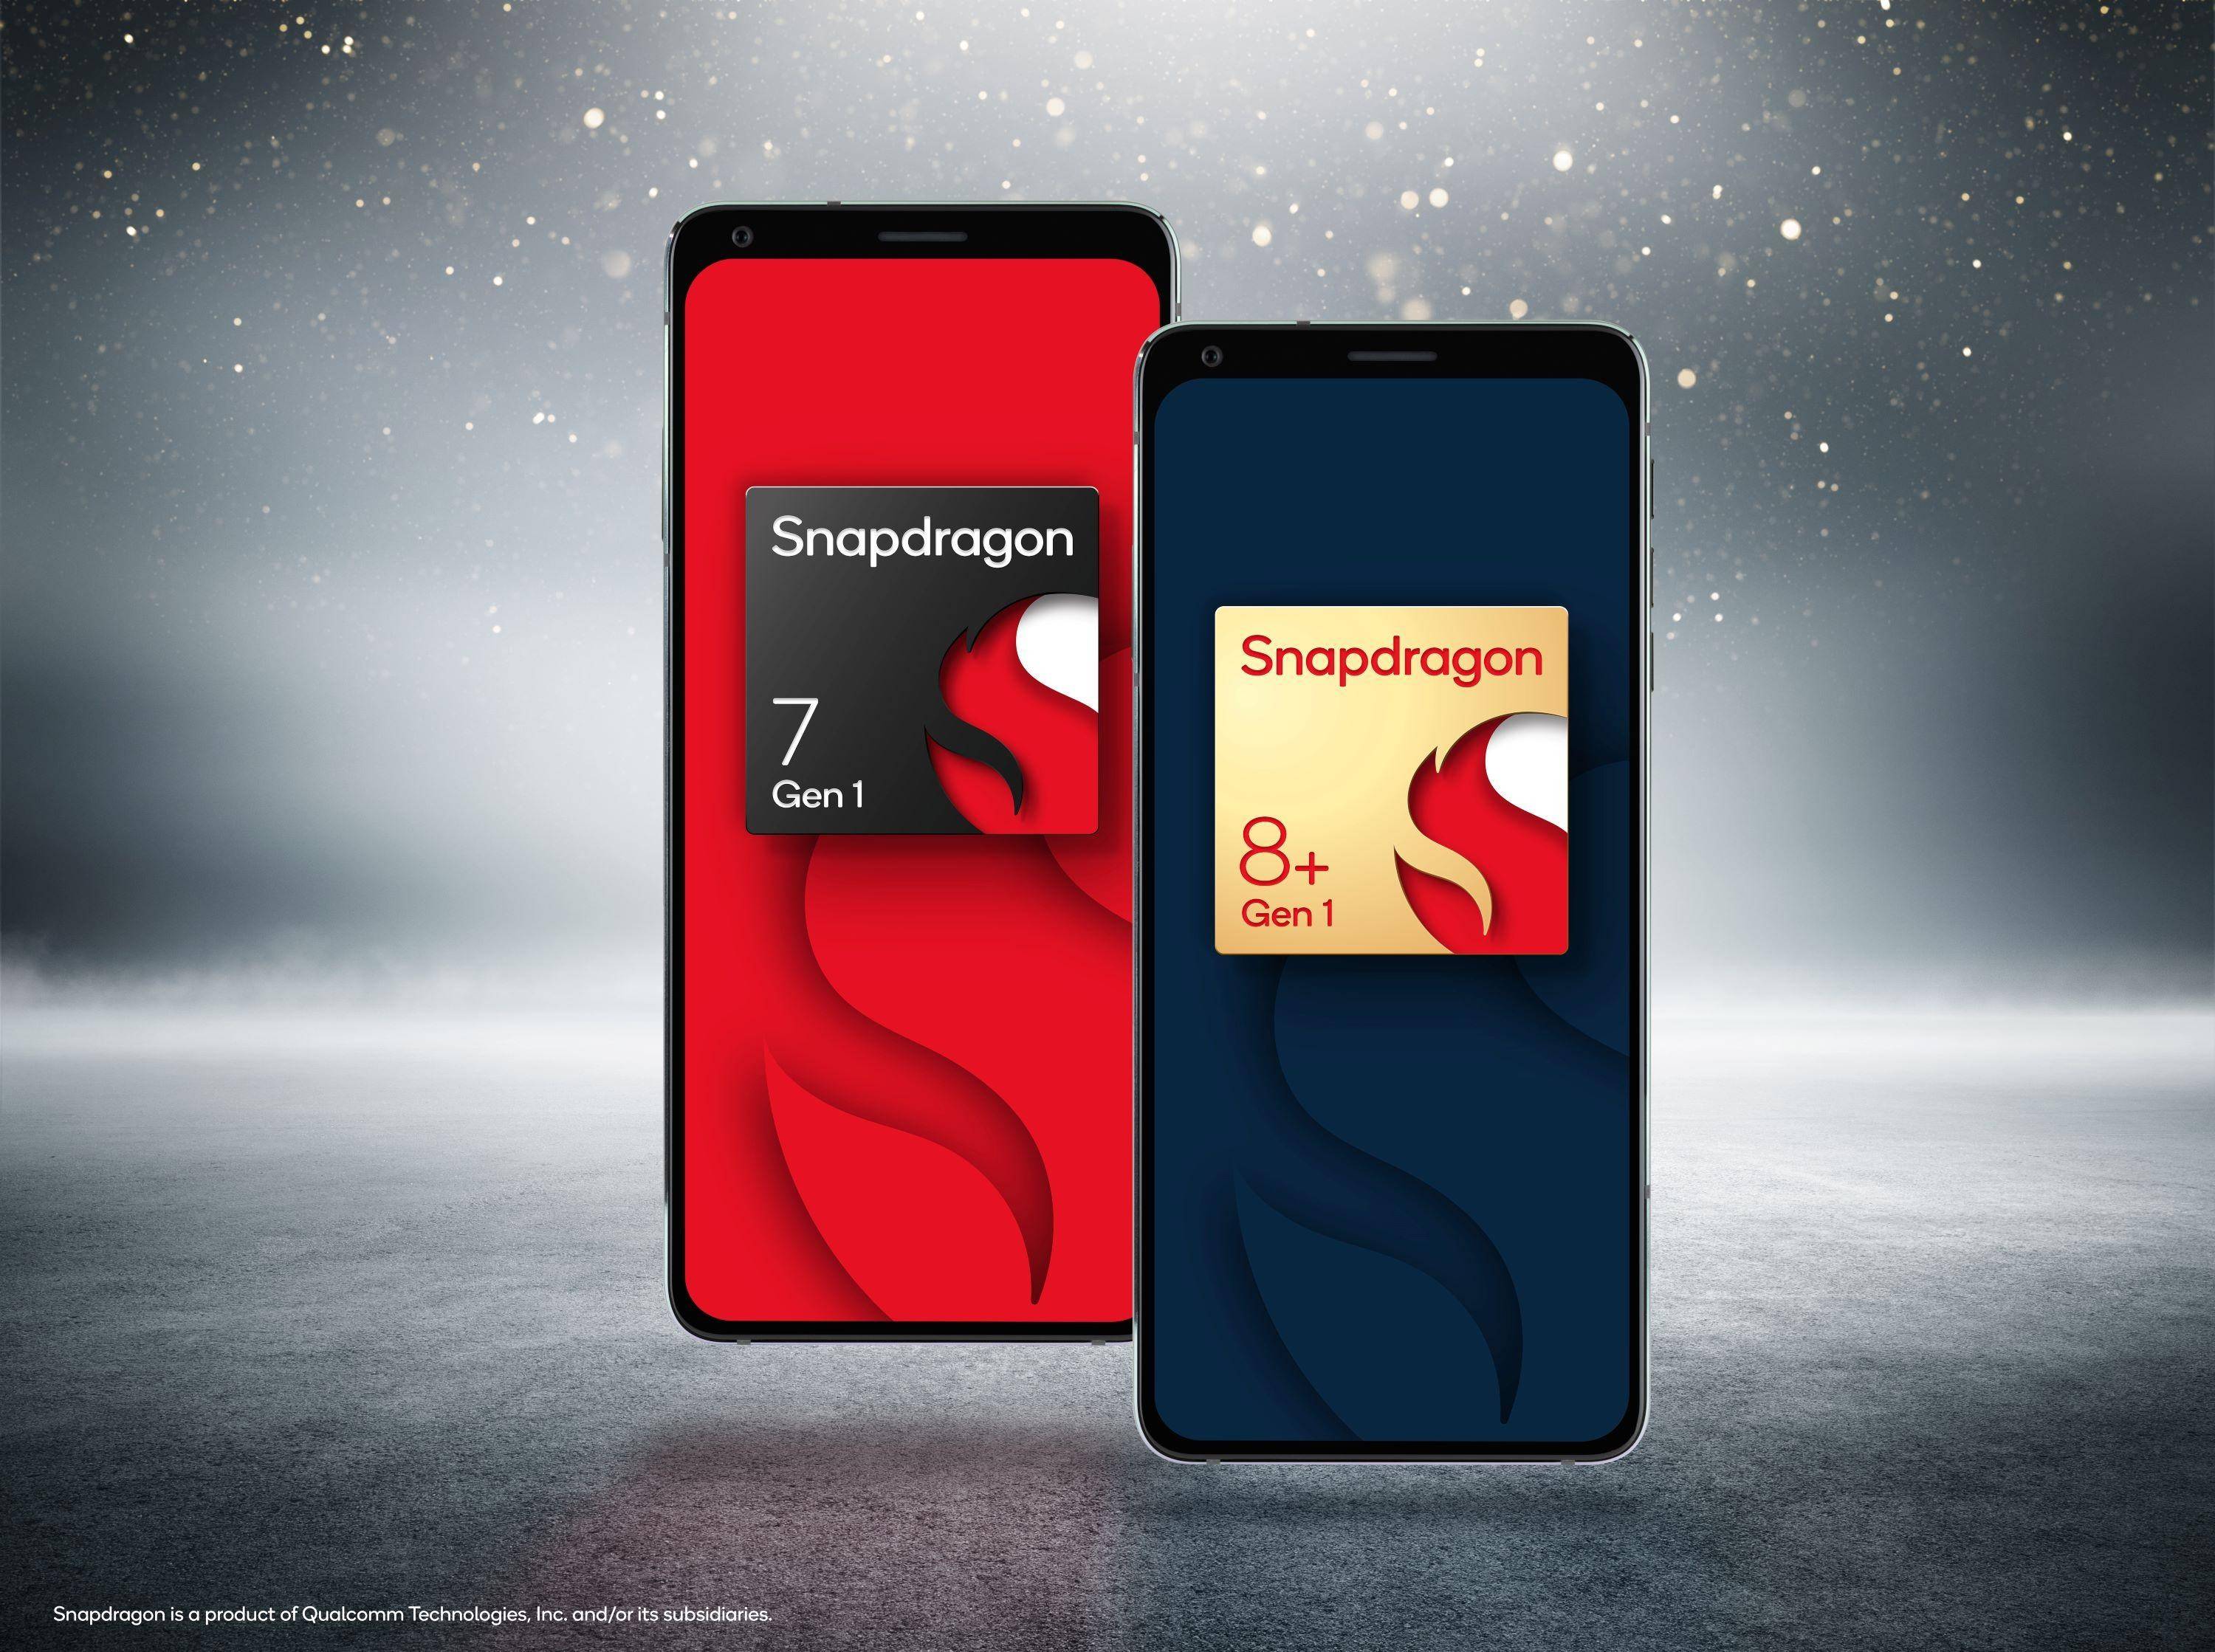 An image showcasing the new Qualcomm Snapdragon 8 Plus Gen 1 and 7 Gen 1 for smartphones